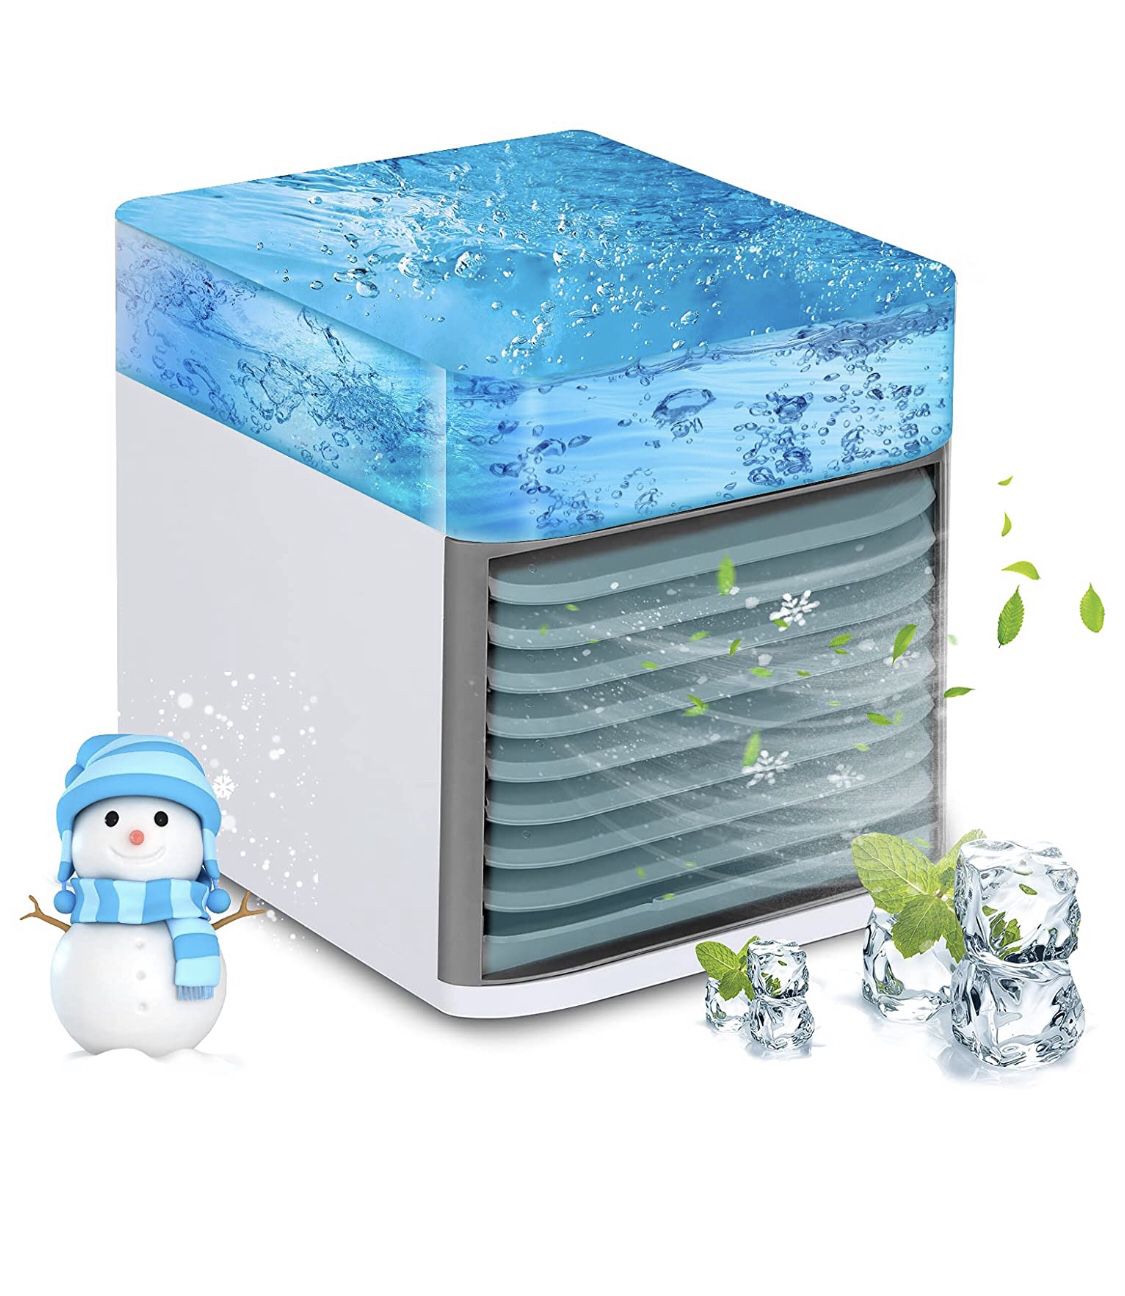 Portable Air Conditioner Fan - USB Powered Air Cooler Unit, Personal Space AC Fan with Humidifier and Purifier Function, 7 LED Lights, 3 Speeds for Ho